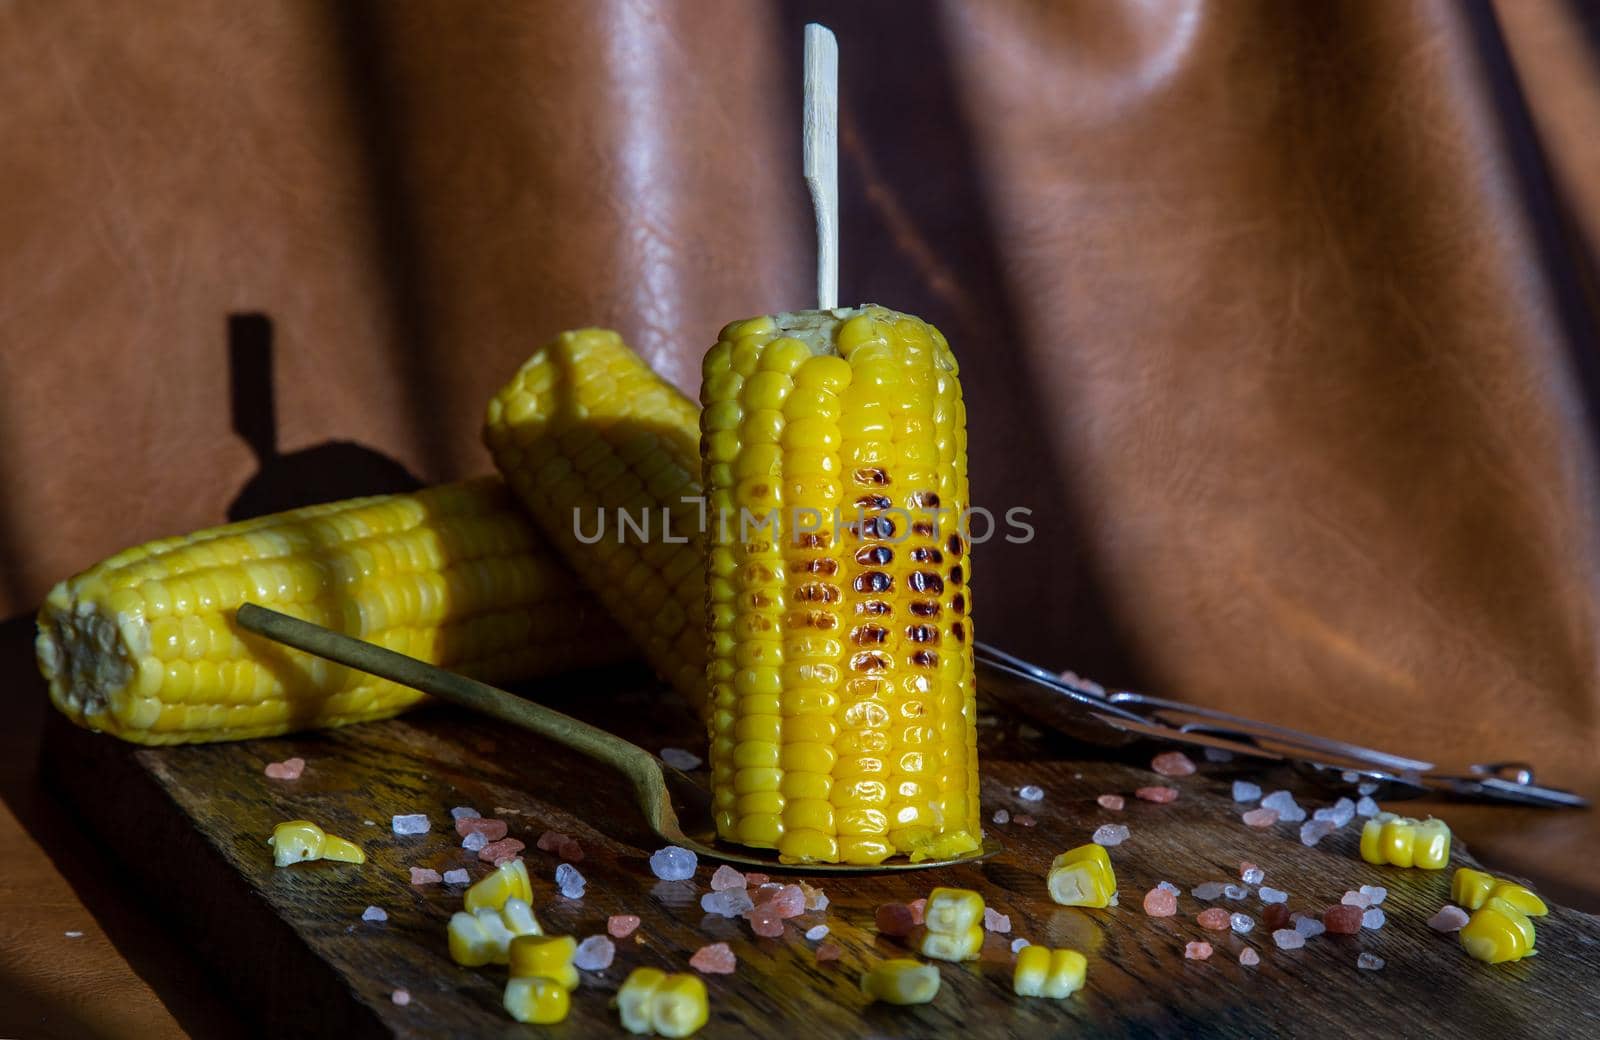 Grilled corn on the cob  on rustic wooden board over brown leather background.  Ideas for barbecue and grill parties, Barbecue concept.